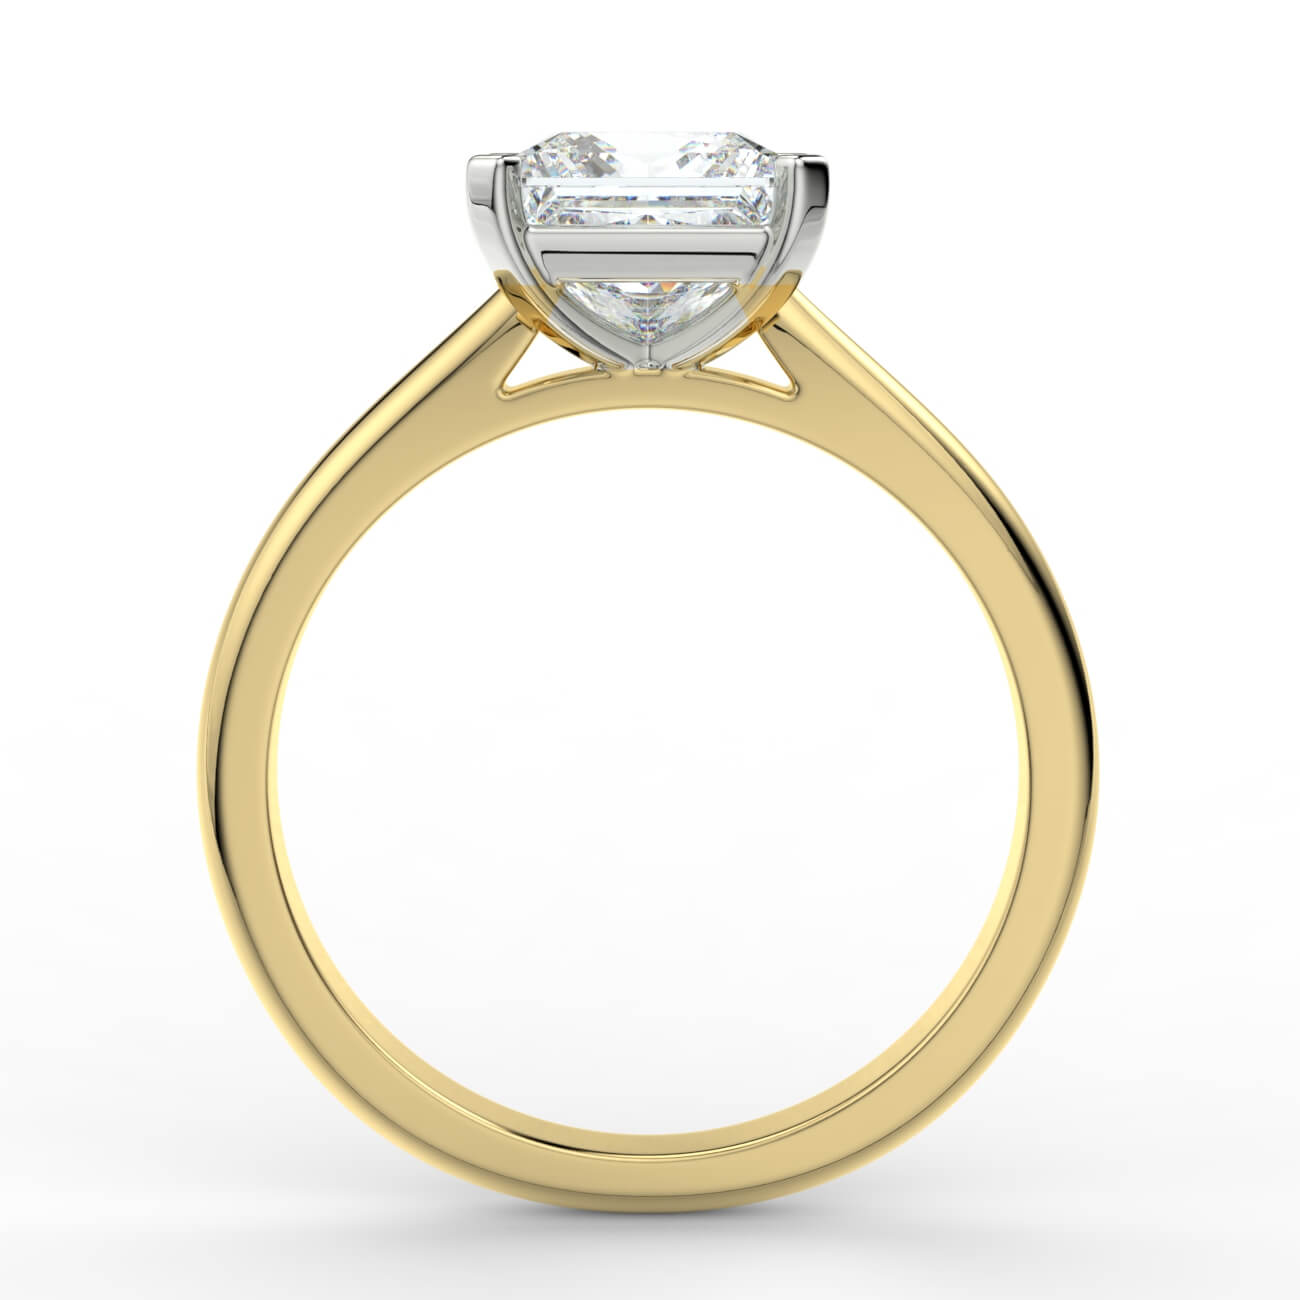 Princess cut diamond cathedral engagement ring in yellow and white gold – Australian Diamond Network